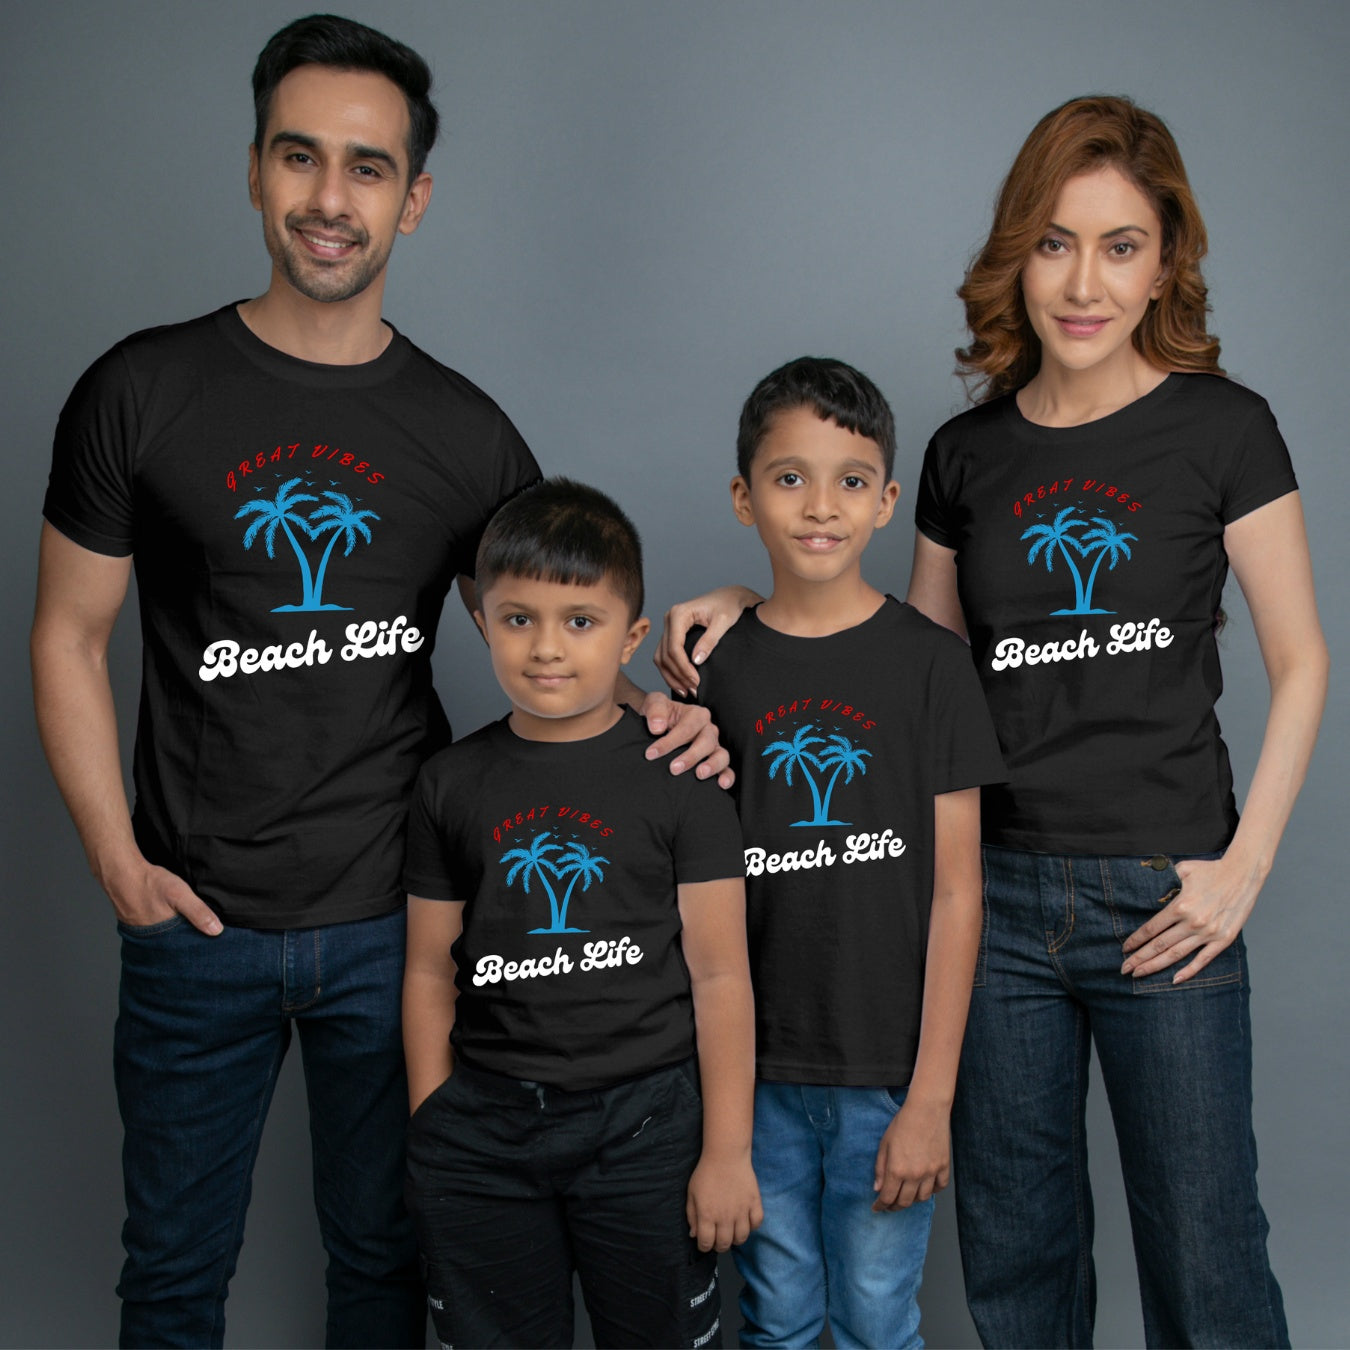 Family t shirts set of 4 Mom Dad Two Sons in Black Colour - Beach Life Variant